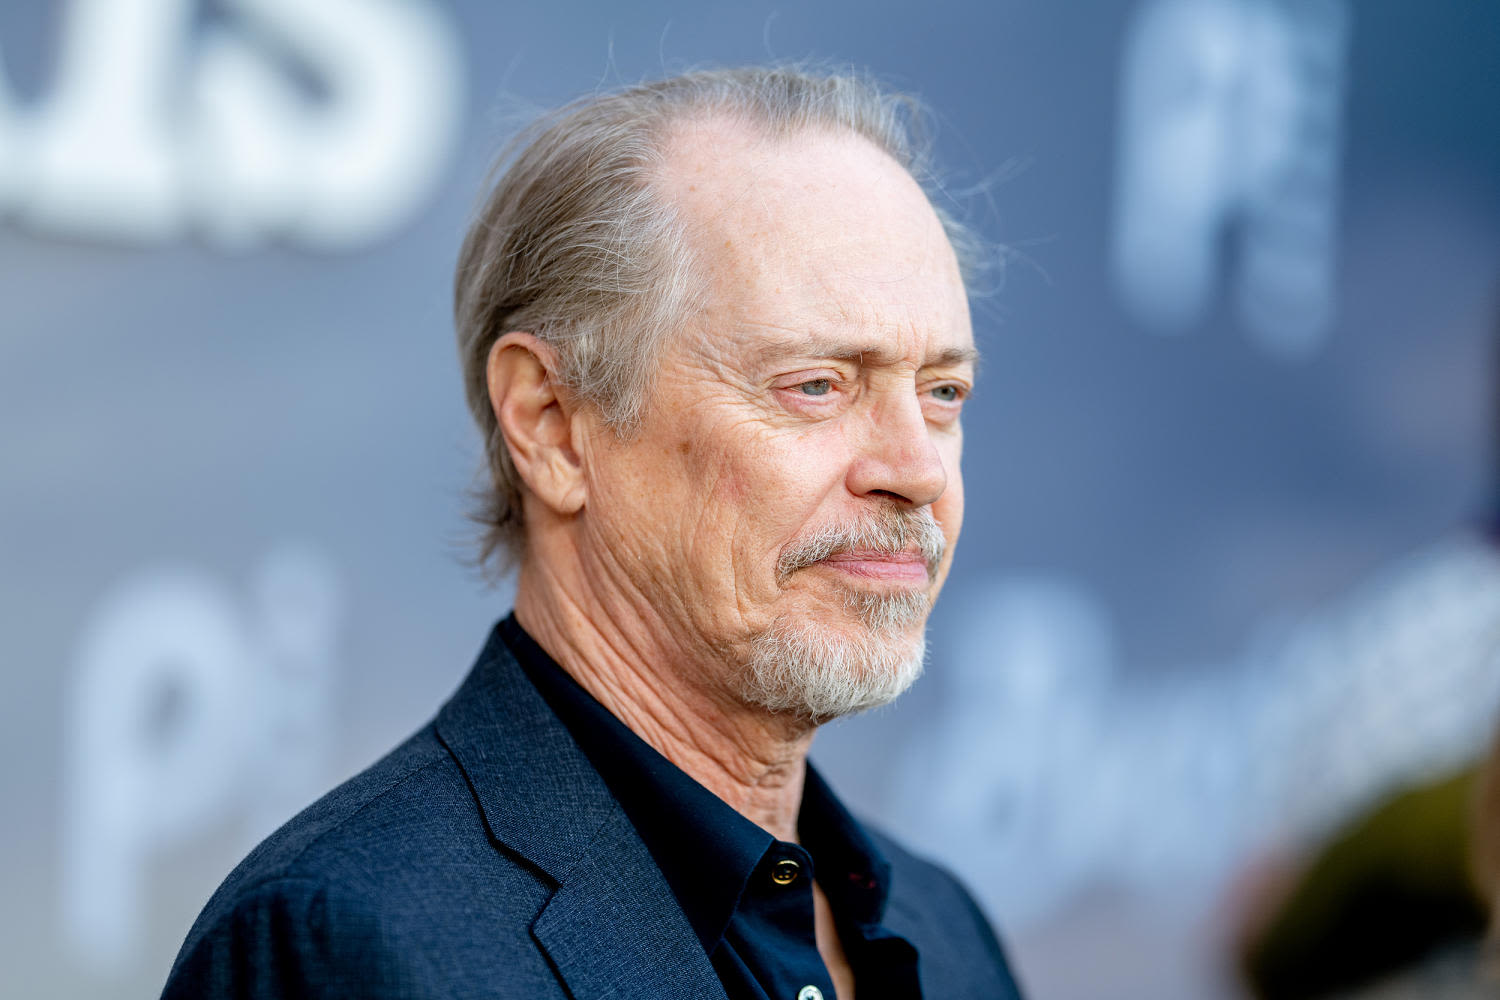 Steve Buscemi punched while walking in New York City